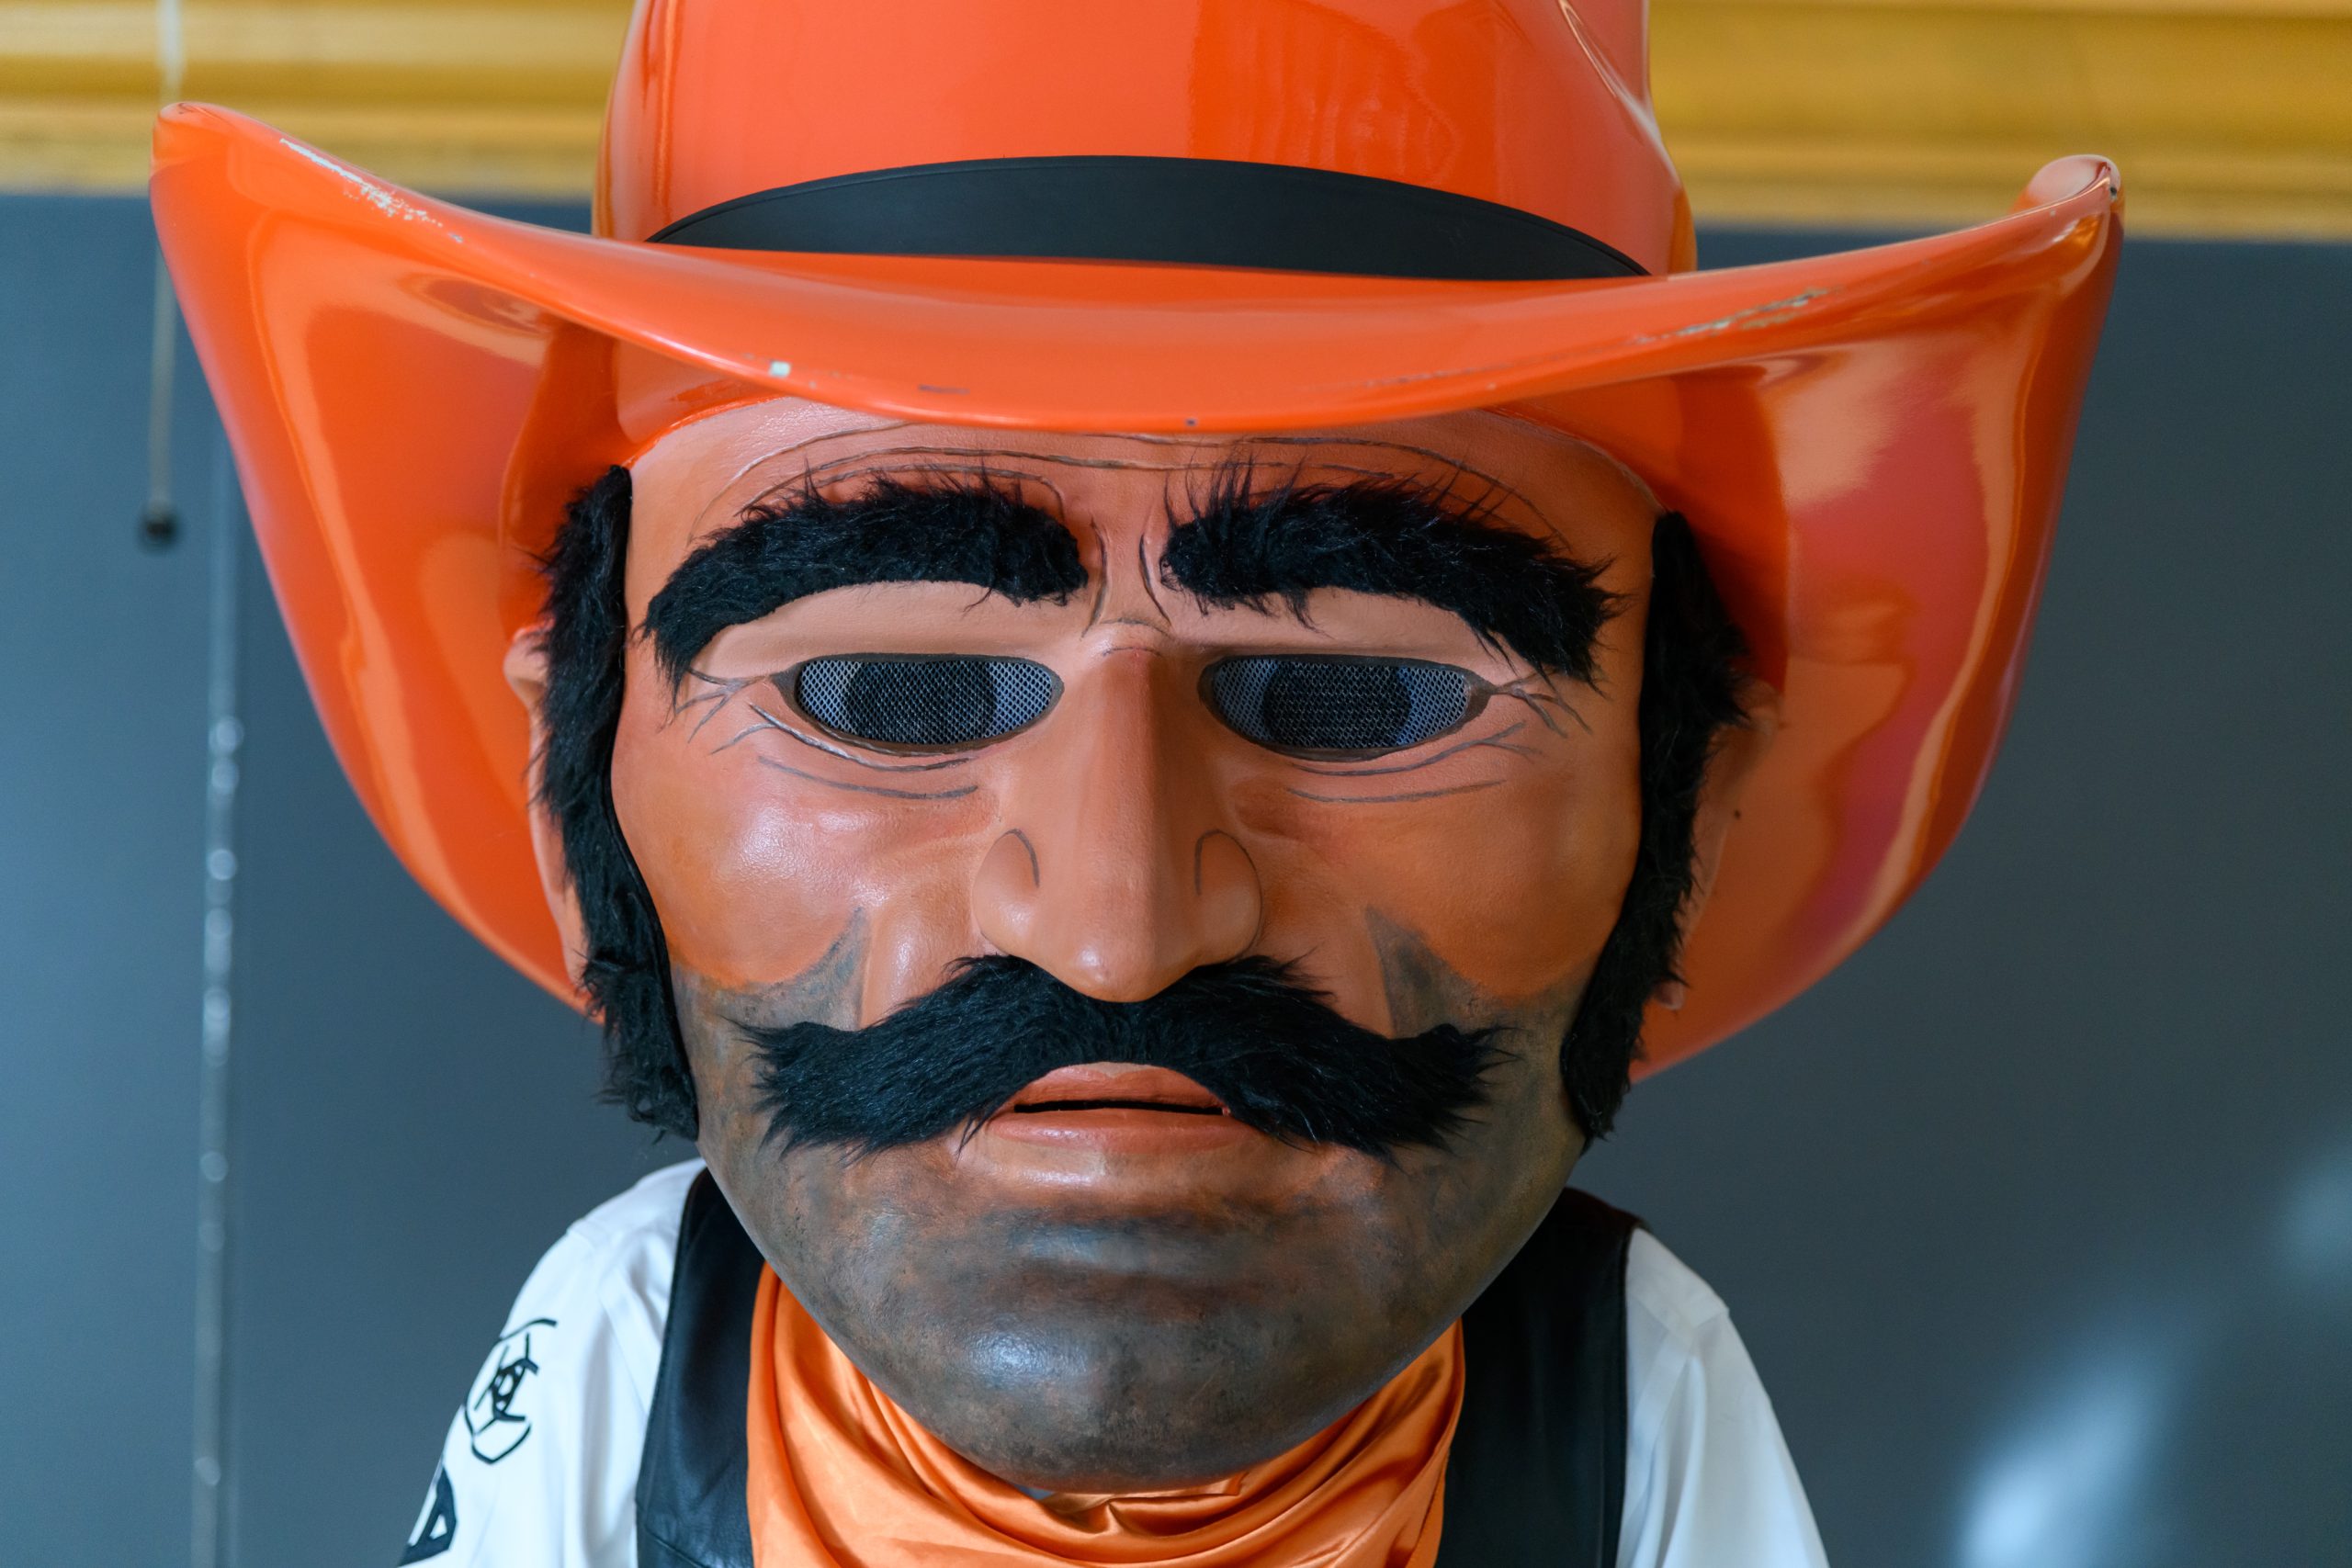 A close up picture of Pistol Pete's face